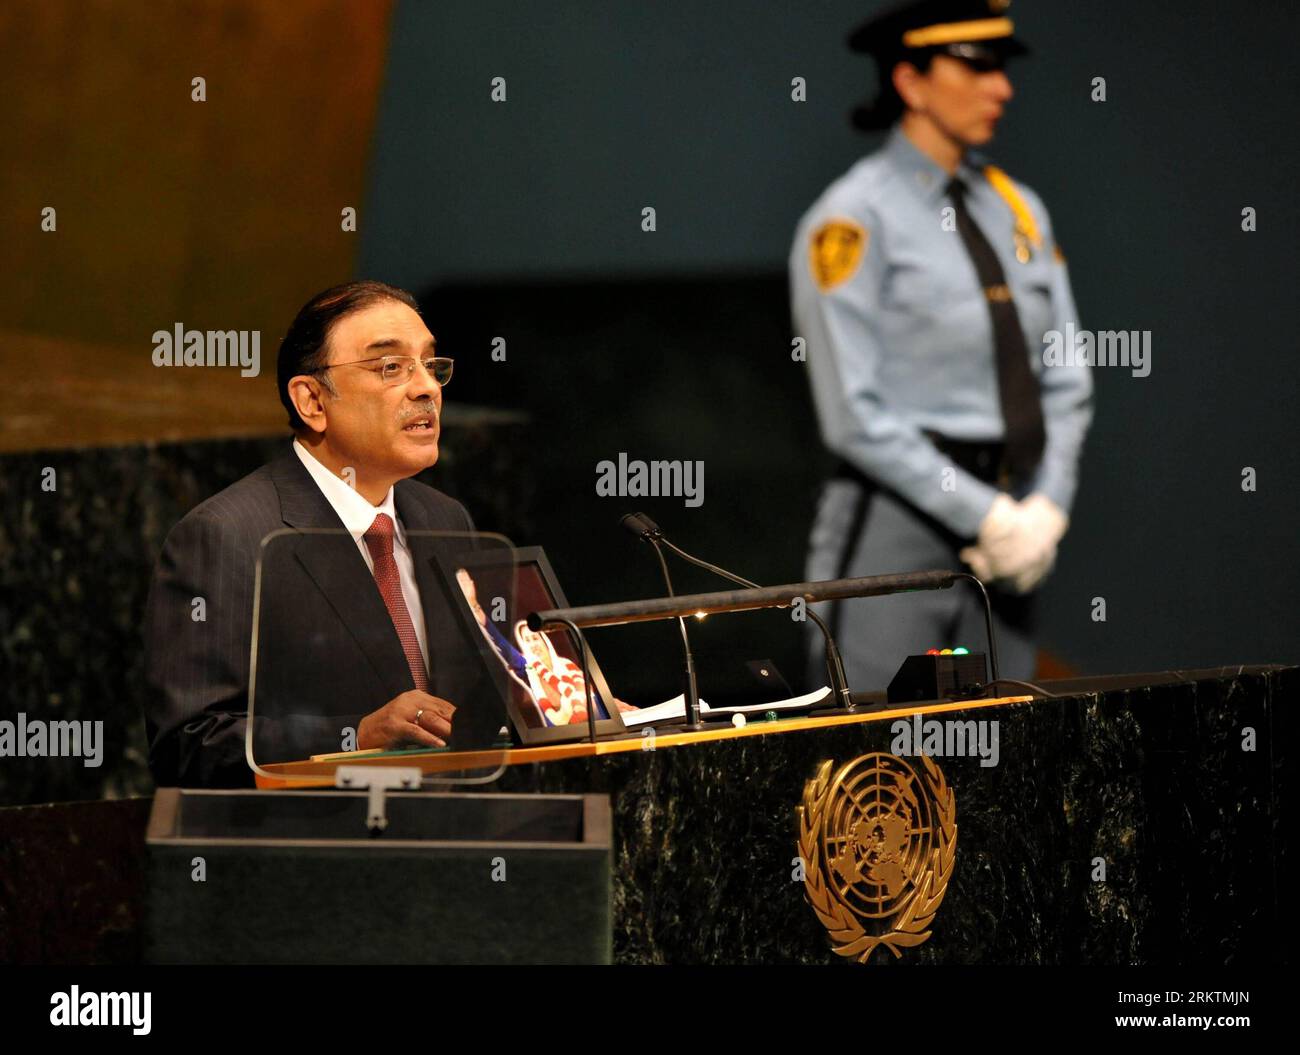 (120925) -- NEW YORK, Sept. 25, 2012 (Xinhua) -- Asif Ali Zardari, president of the Islamic Republic of Pakistan, addresses the 67th session of the UN General Assembly s annual general debate at the UN headquarters in New York, the United States, Sept. 25, 2012. The debate started here on Tuesday. (Xinhua/Wang Lei) UN-NEW YORK-GENERAL ASSEMBLY-ANNUAL DEBATE PUBLICATIONxNOTxINxCHN Stock Photo